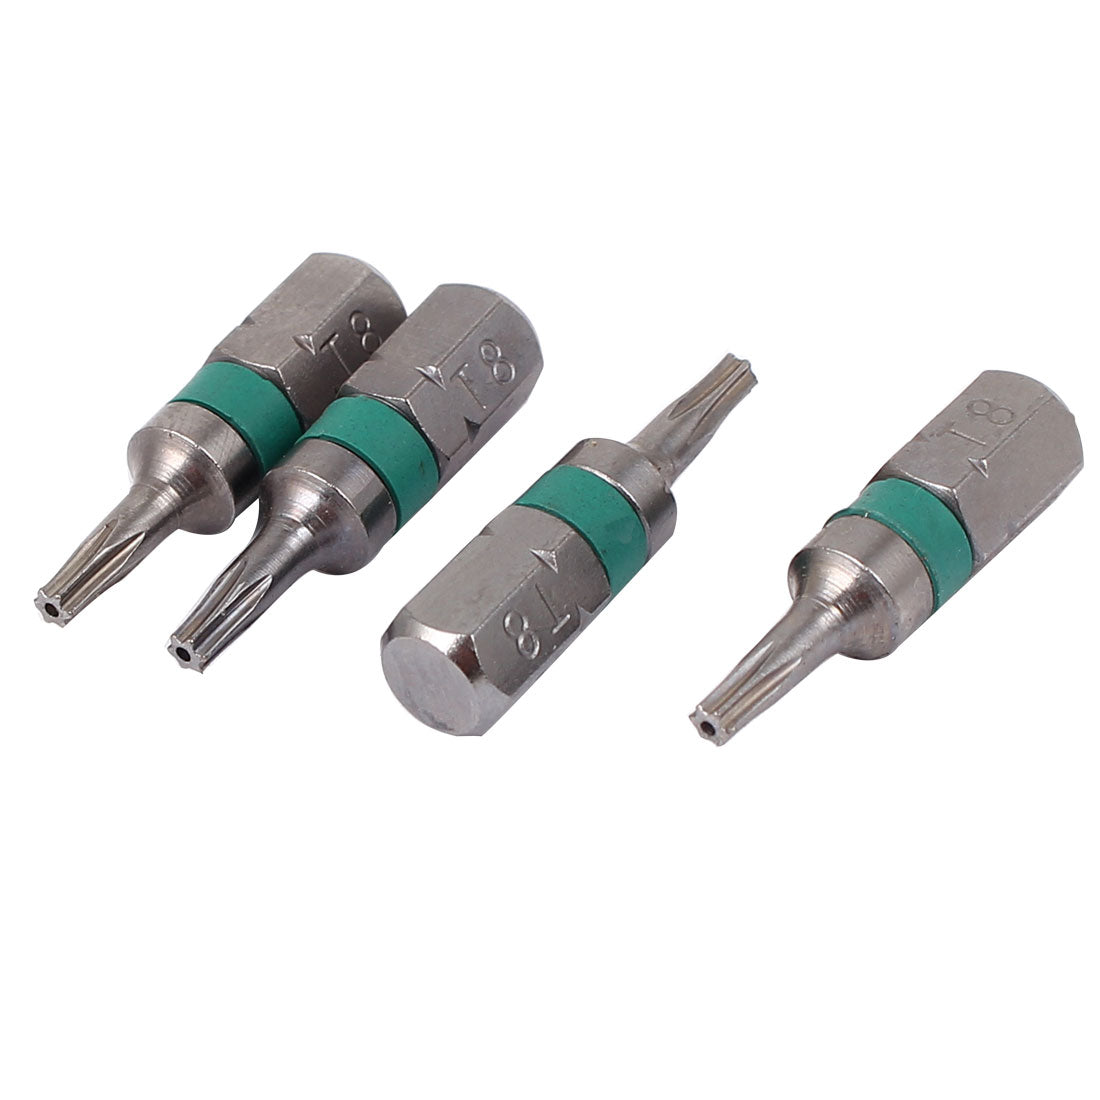 uxcell Uxcell T8 Hex Shank Magnetic Torx Security Screwdriver Bit Gray 4pcs